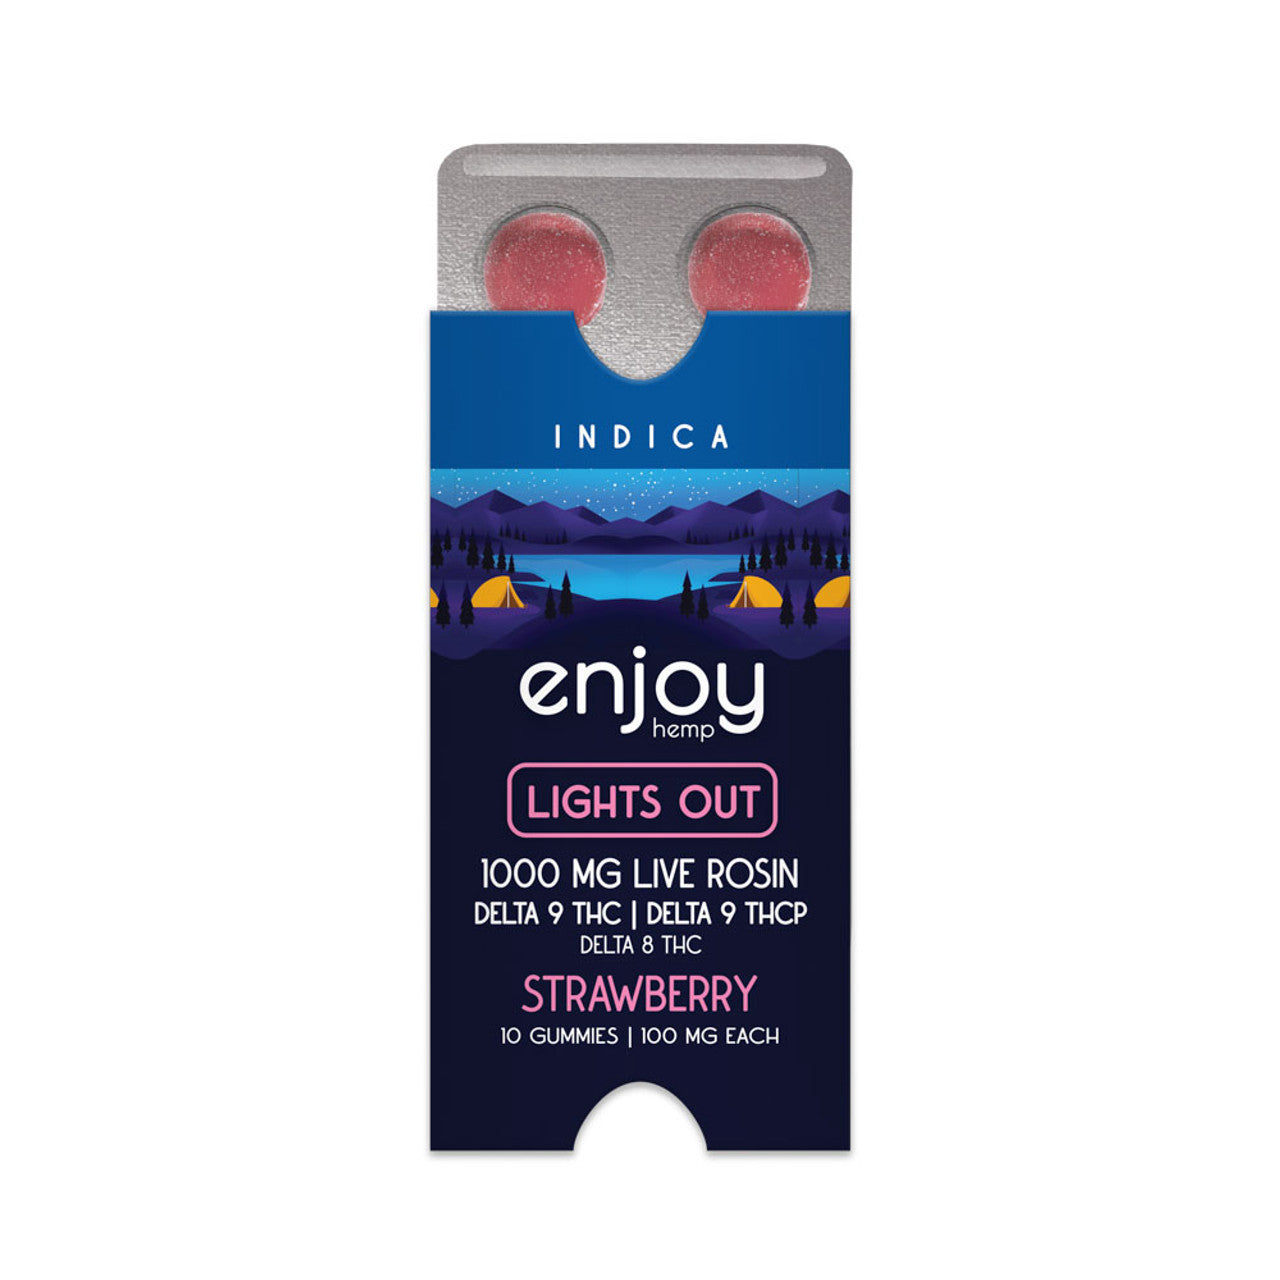 Live Rosin Indica-Infused Strawberry THC-P+ Delta 9 + Delta 8 Gummies for Lights Out - 1000 mg Total (100 mg Each | 10 Gummies) - Triangle Hemp Wellness